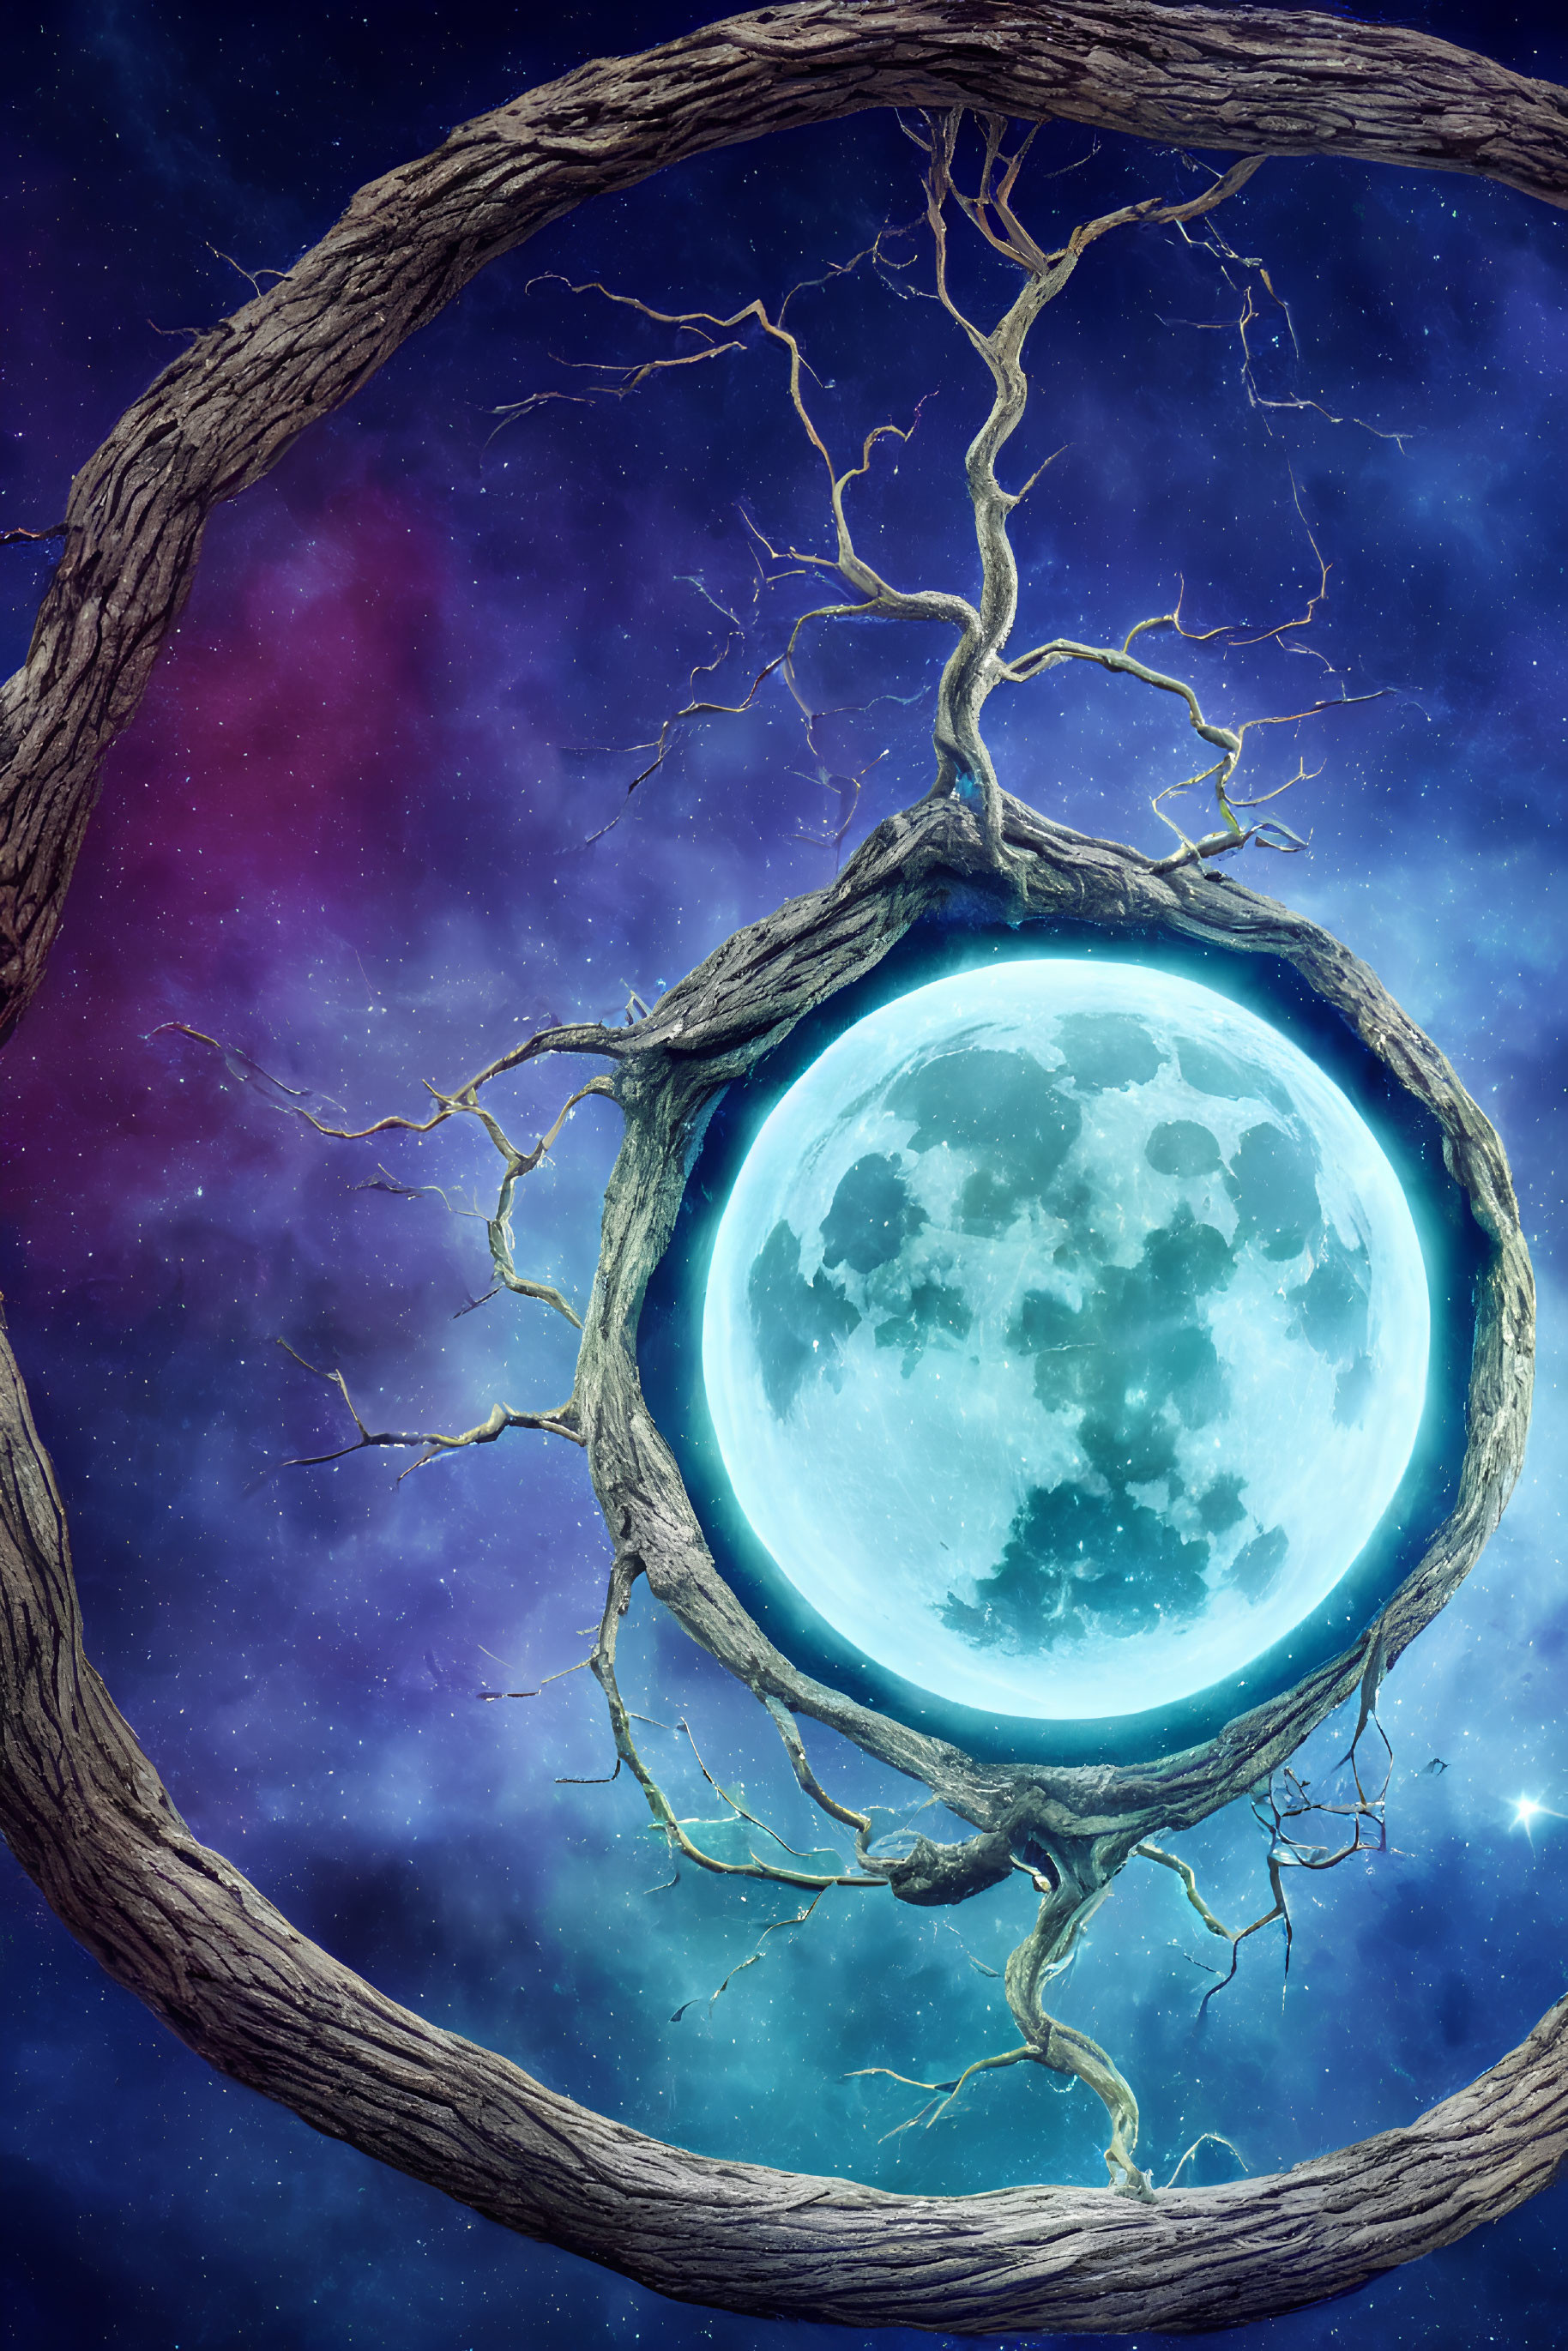 Full moon surrounded by twisted tree branches in surreal cosmic scene